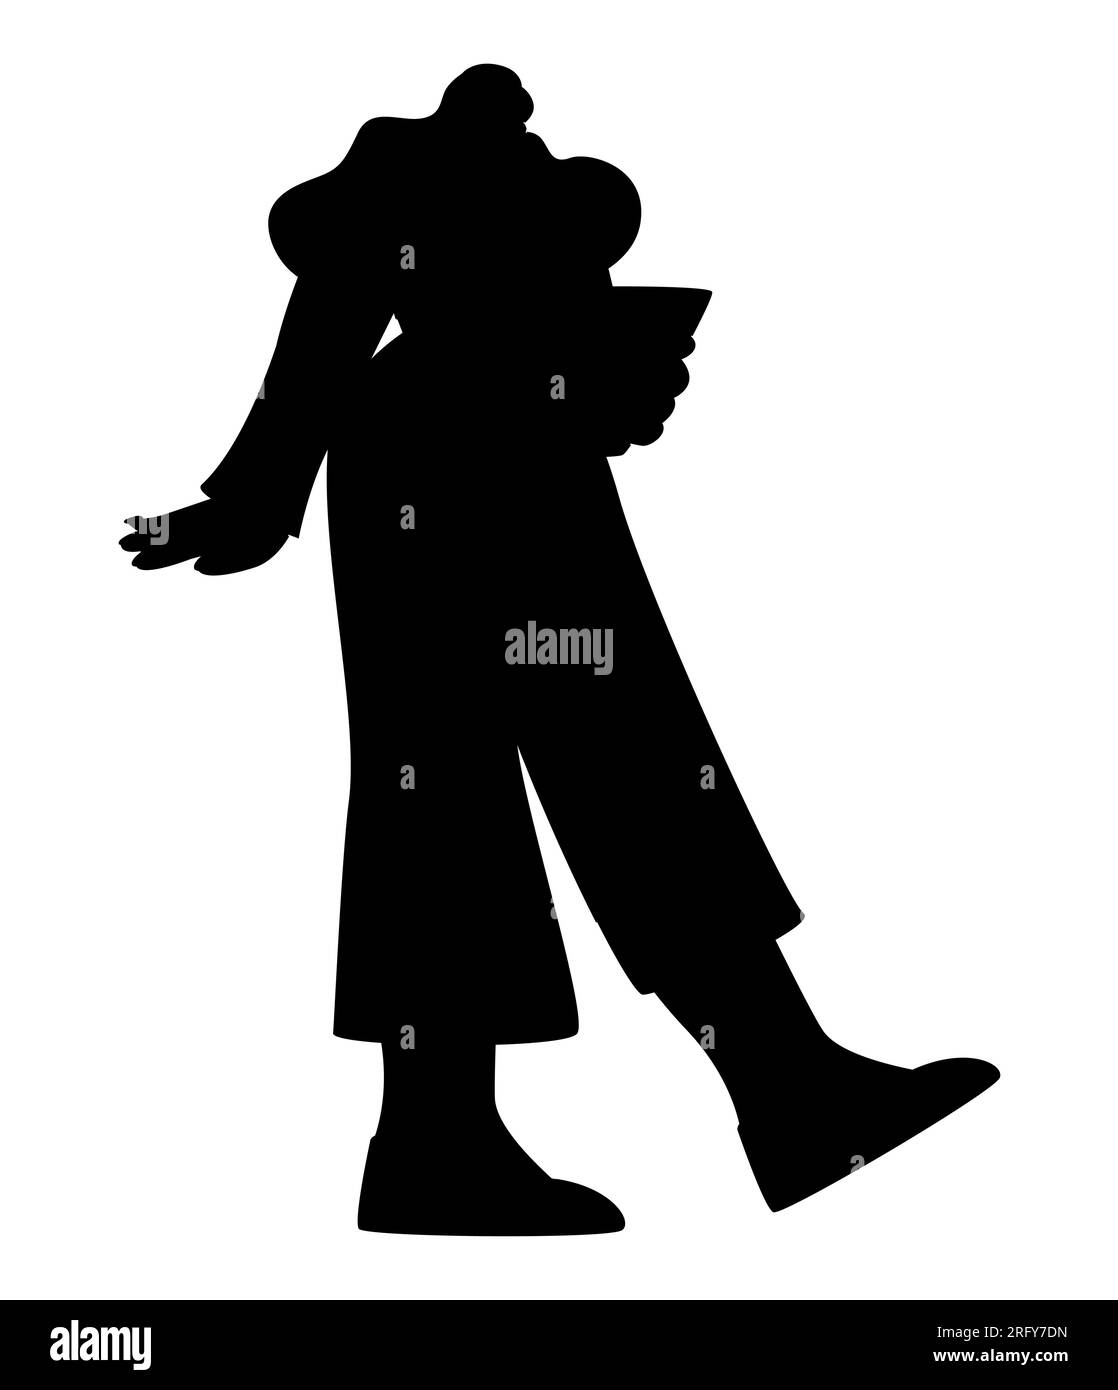 Holding hands silhouette cartoon Black and White Stock Photos & Images ...